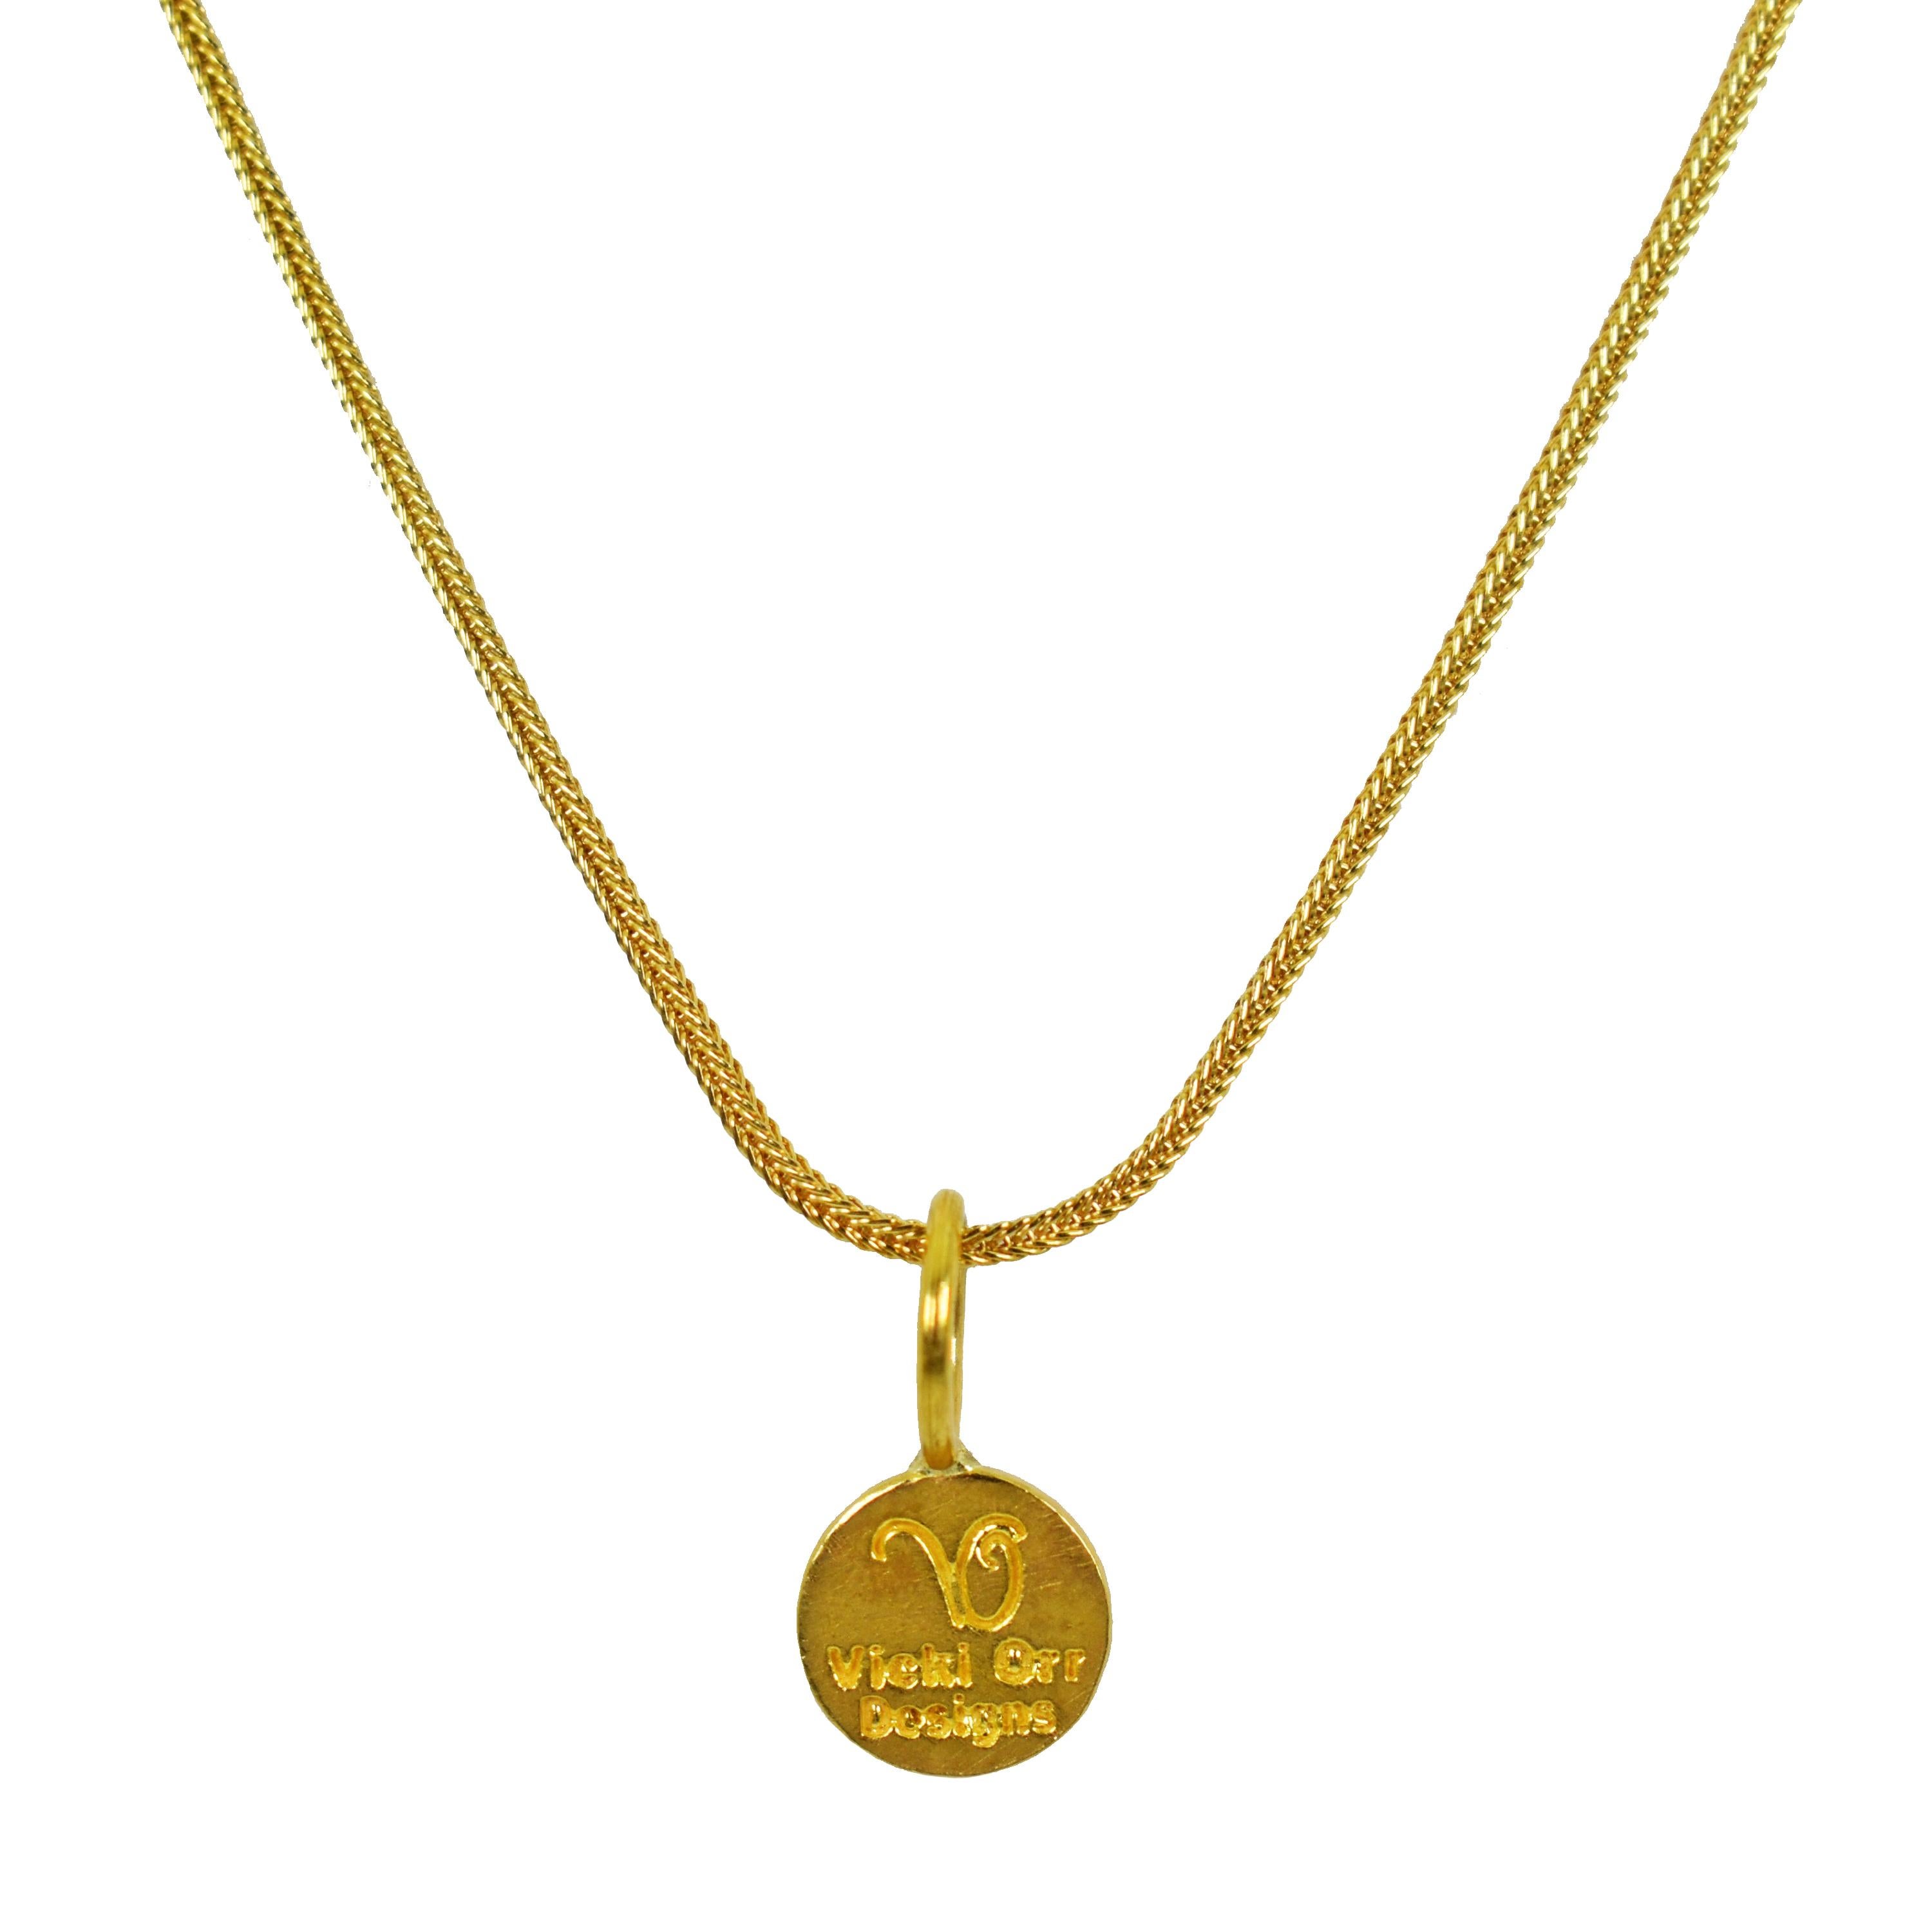 22k yellow gold ancient Greek Ixthus or Ichthus symbol charm pendant on an 18 inch 18k gold foxtail chain necklace. Charm pendant is 0.69 inch in length. 